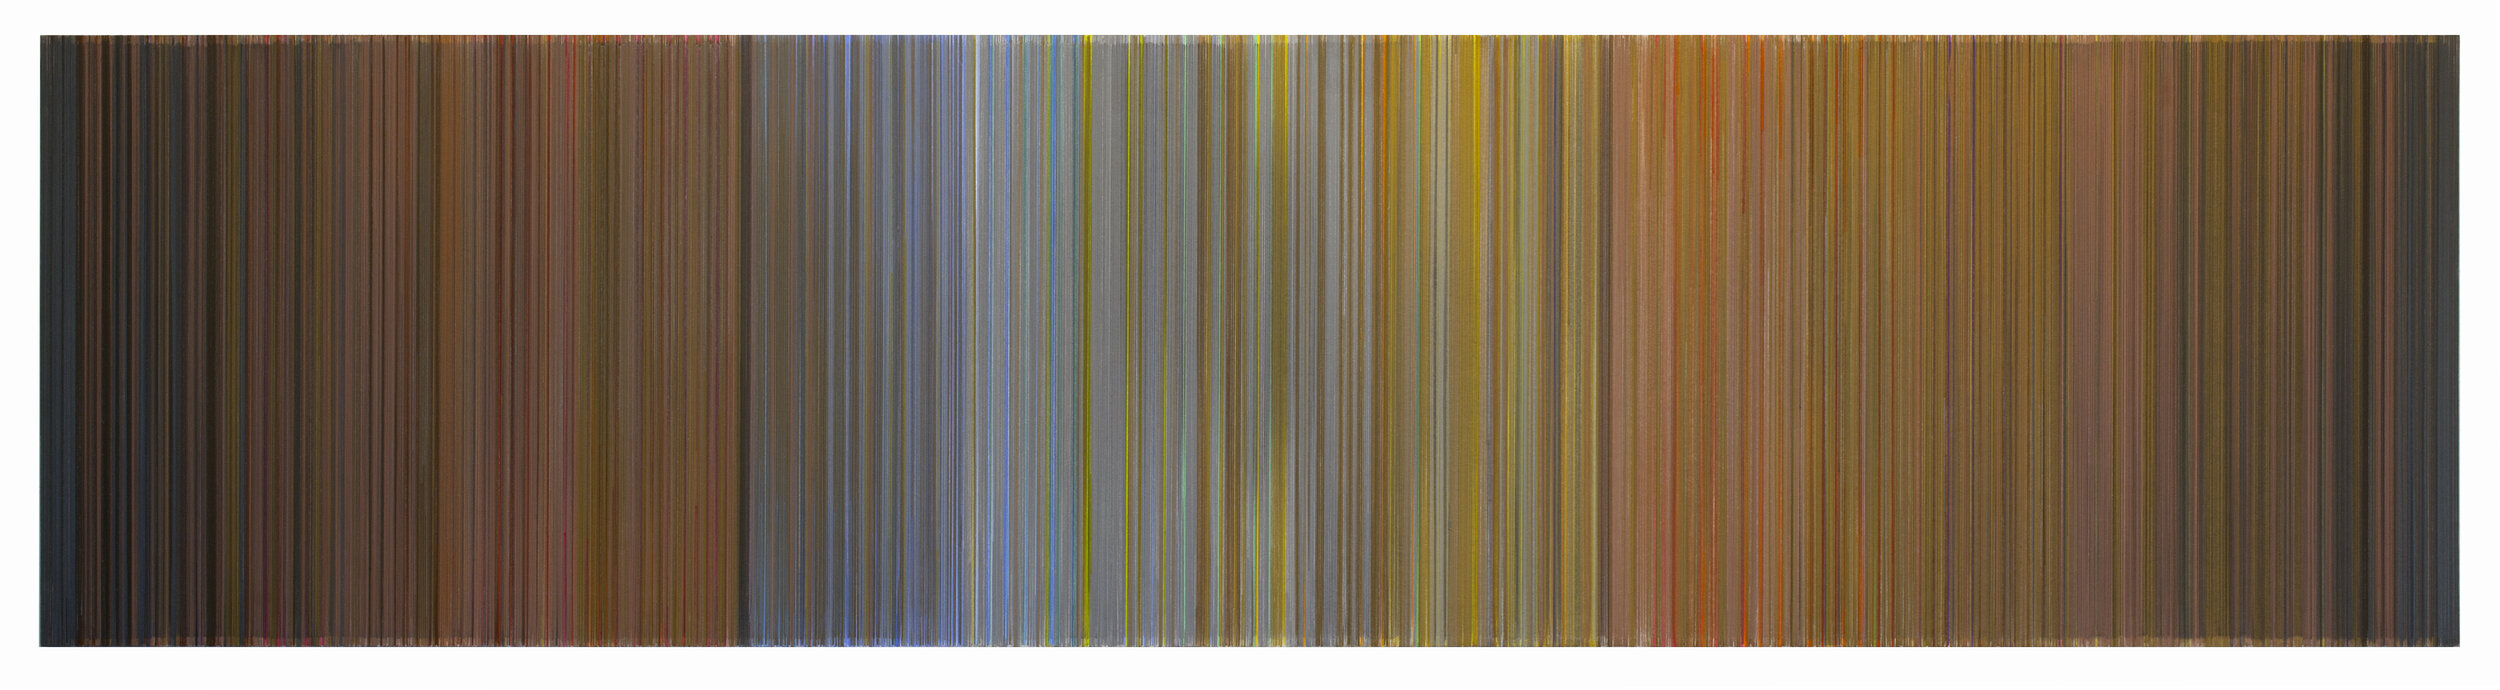    But Sweeter far.   2017 graphite and colored pencil on mat board 20 x 80 inches title from  The Prelude  or  Growth of a Poet’s Mind  by William Wordsworth, written throughout his life from 1798 - 1850 